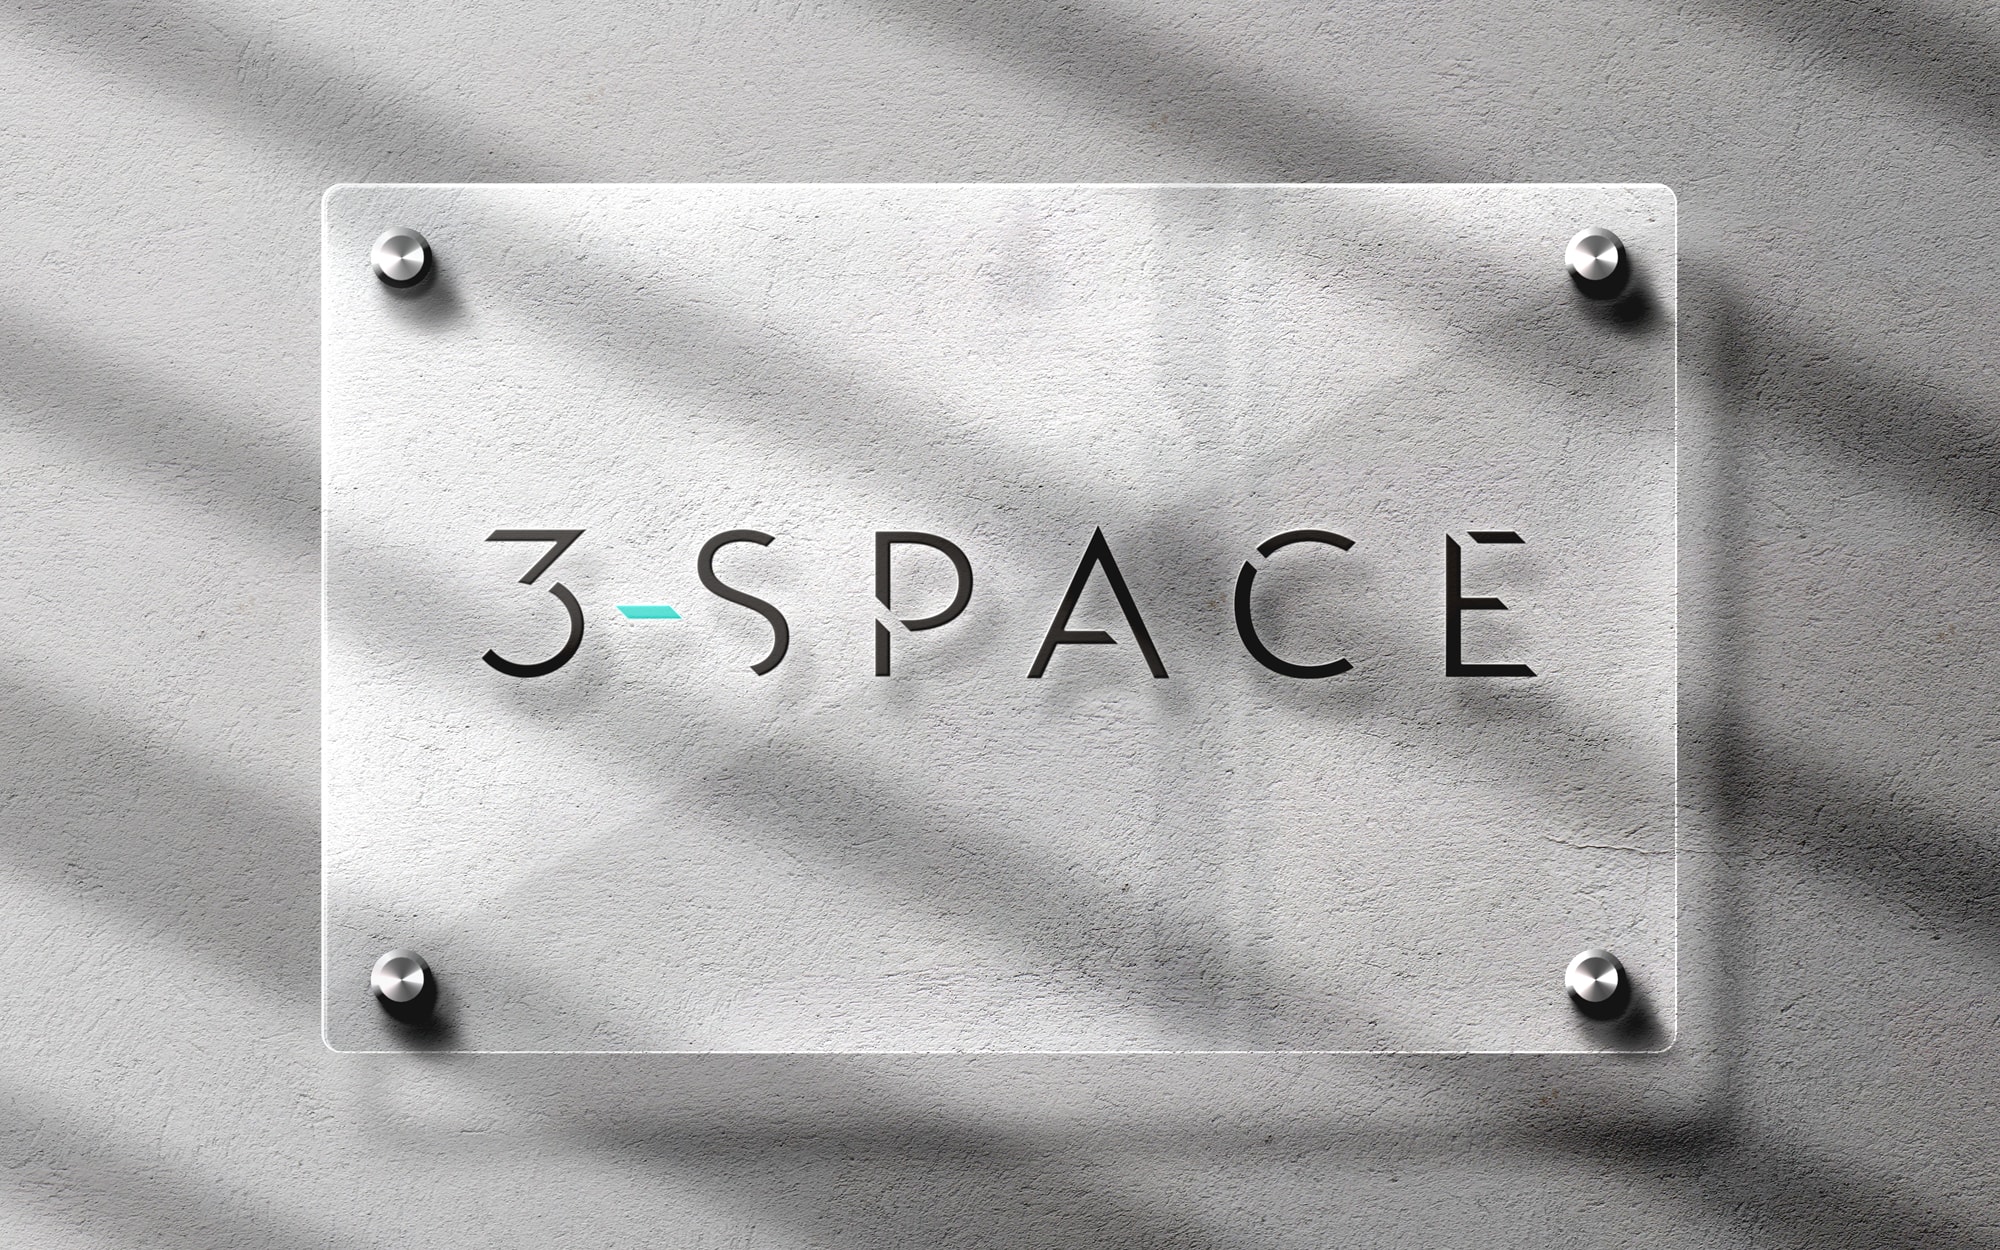 3-Space sign